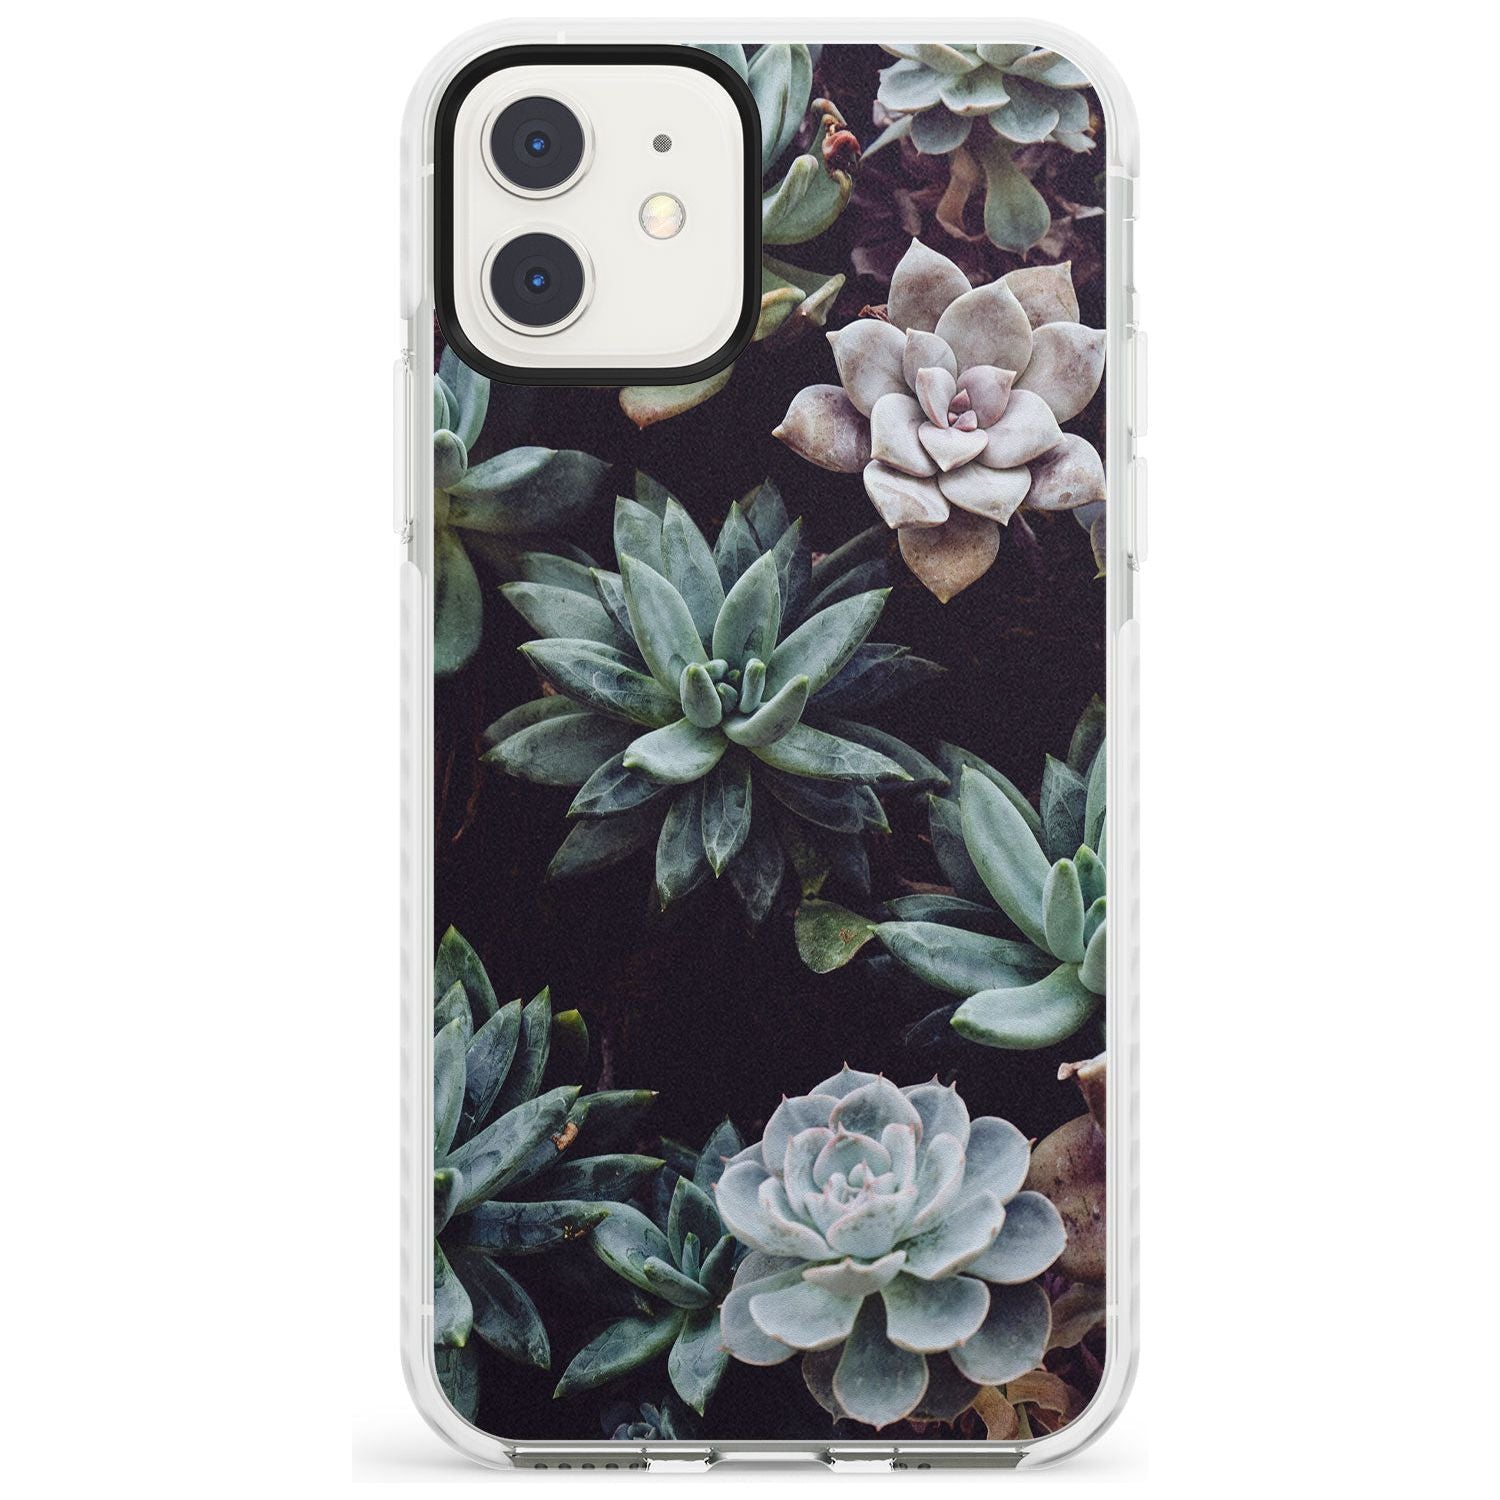 Mixed Succulents - Real Botanical Photographs Impact Phone Case for iPhone 11